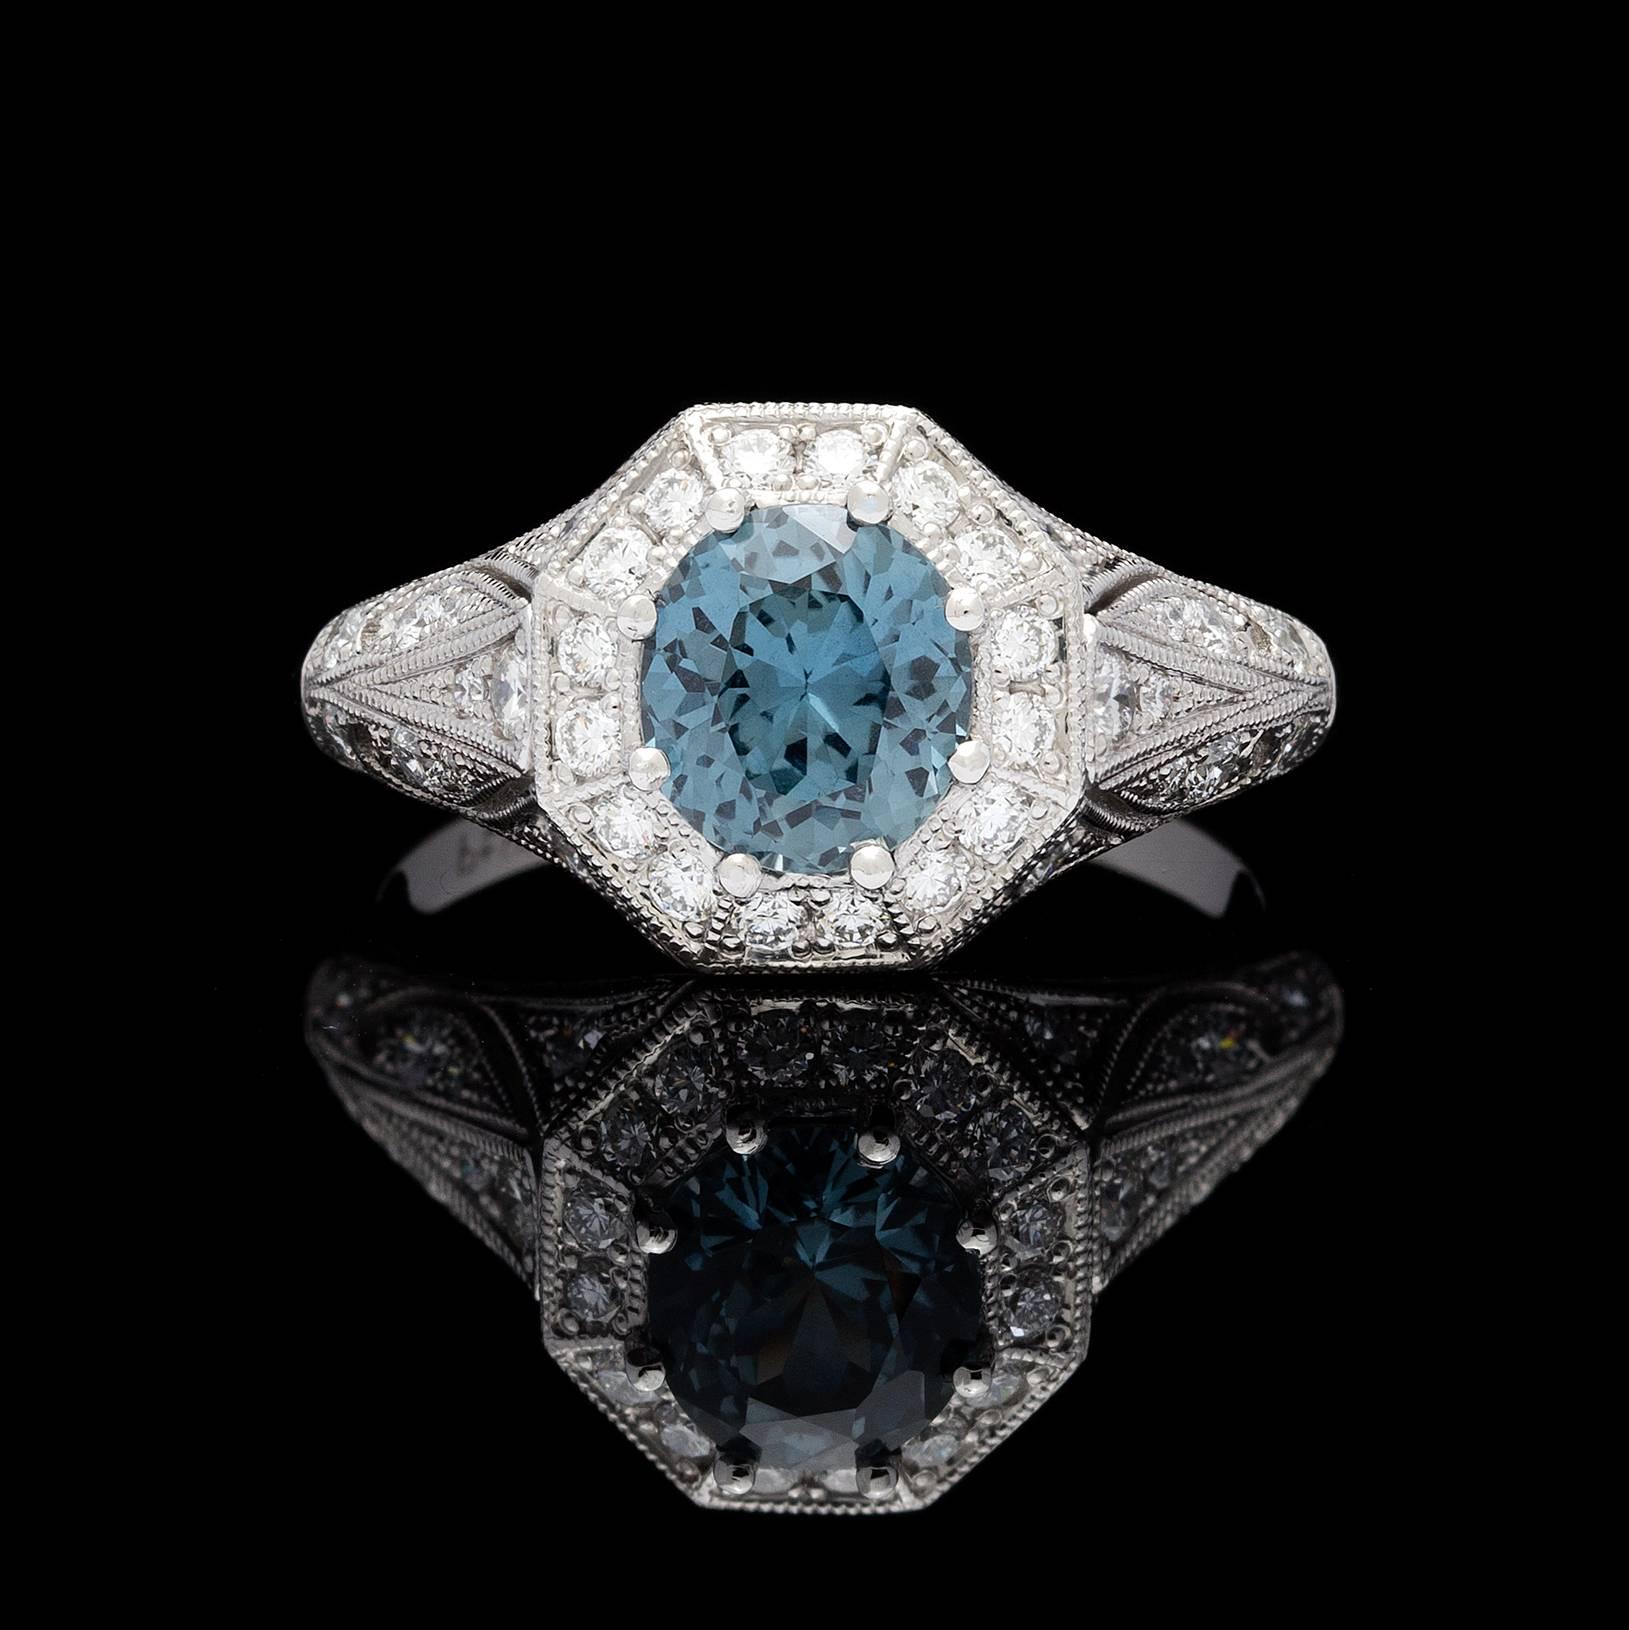 Platinum diamond openwork ring features a 1.53 carat GIA grayish-blue oval mixed brilliant cut sapphire accompanied by report # 1106710503. Top face of the ring is octagonal in shape detailed with milgrain edges. The brilliance of the ring is